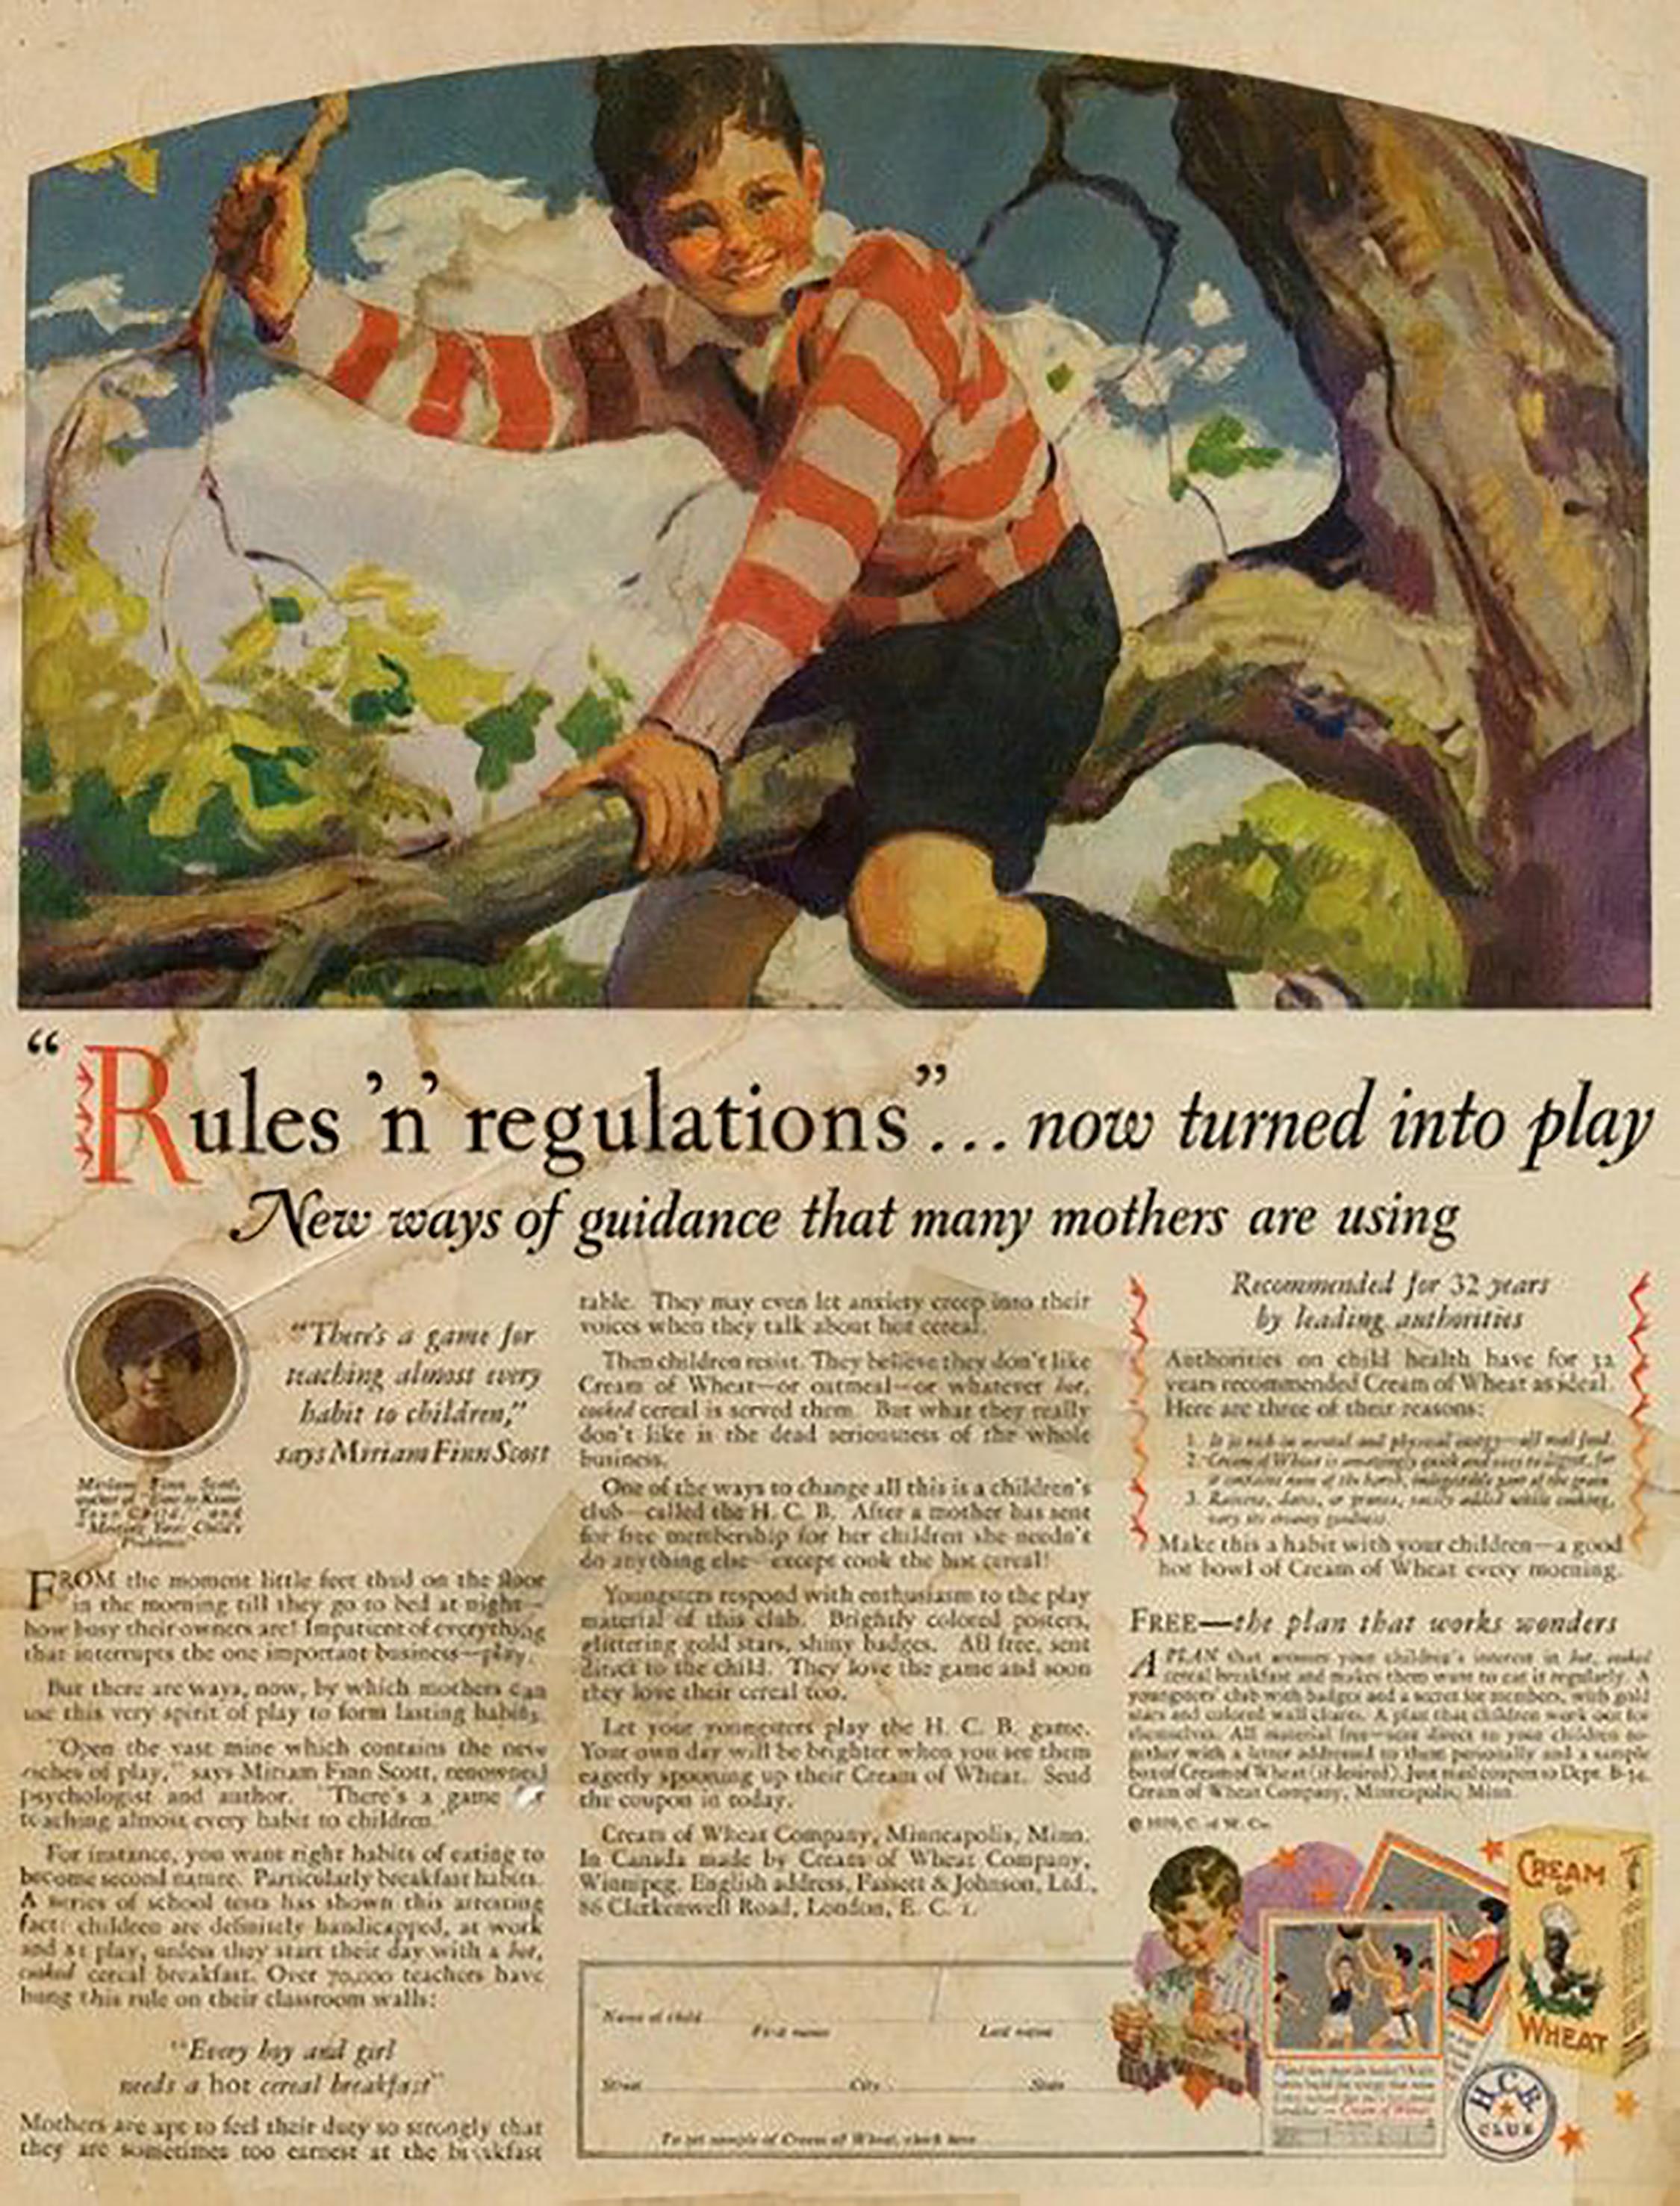 Boy in Striped Sweater Sits on a Tree Branch, Advertisement, Cream of Wheat, 1929 - Painting by Haddon Hubbard Sundblom